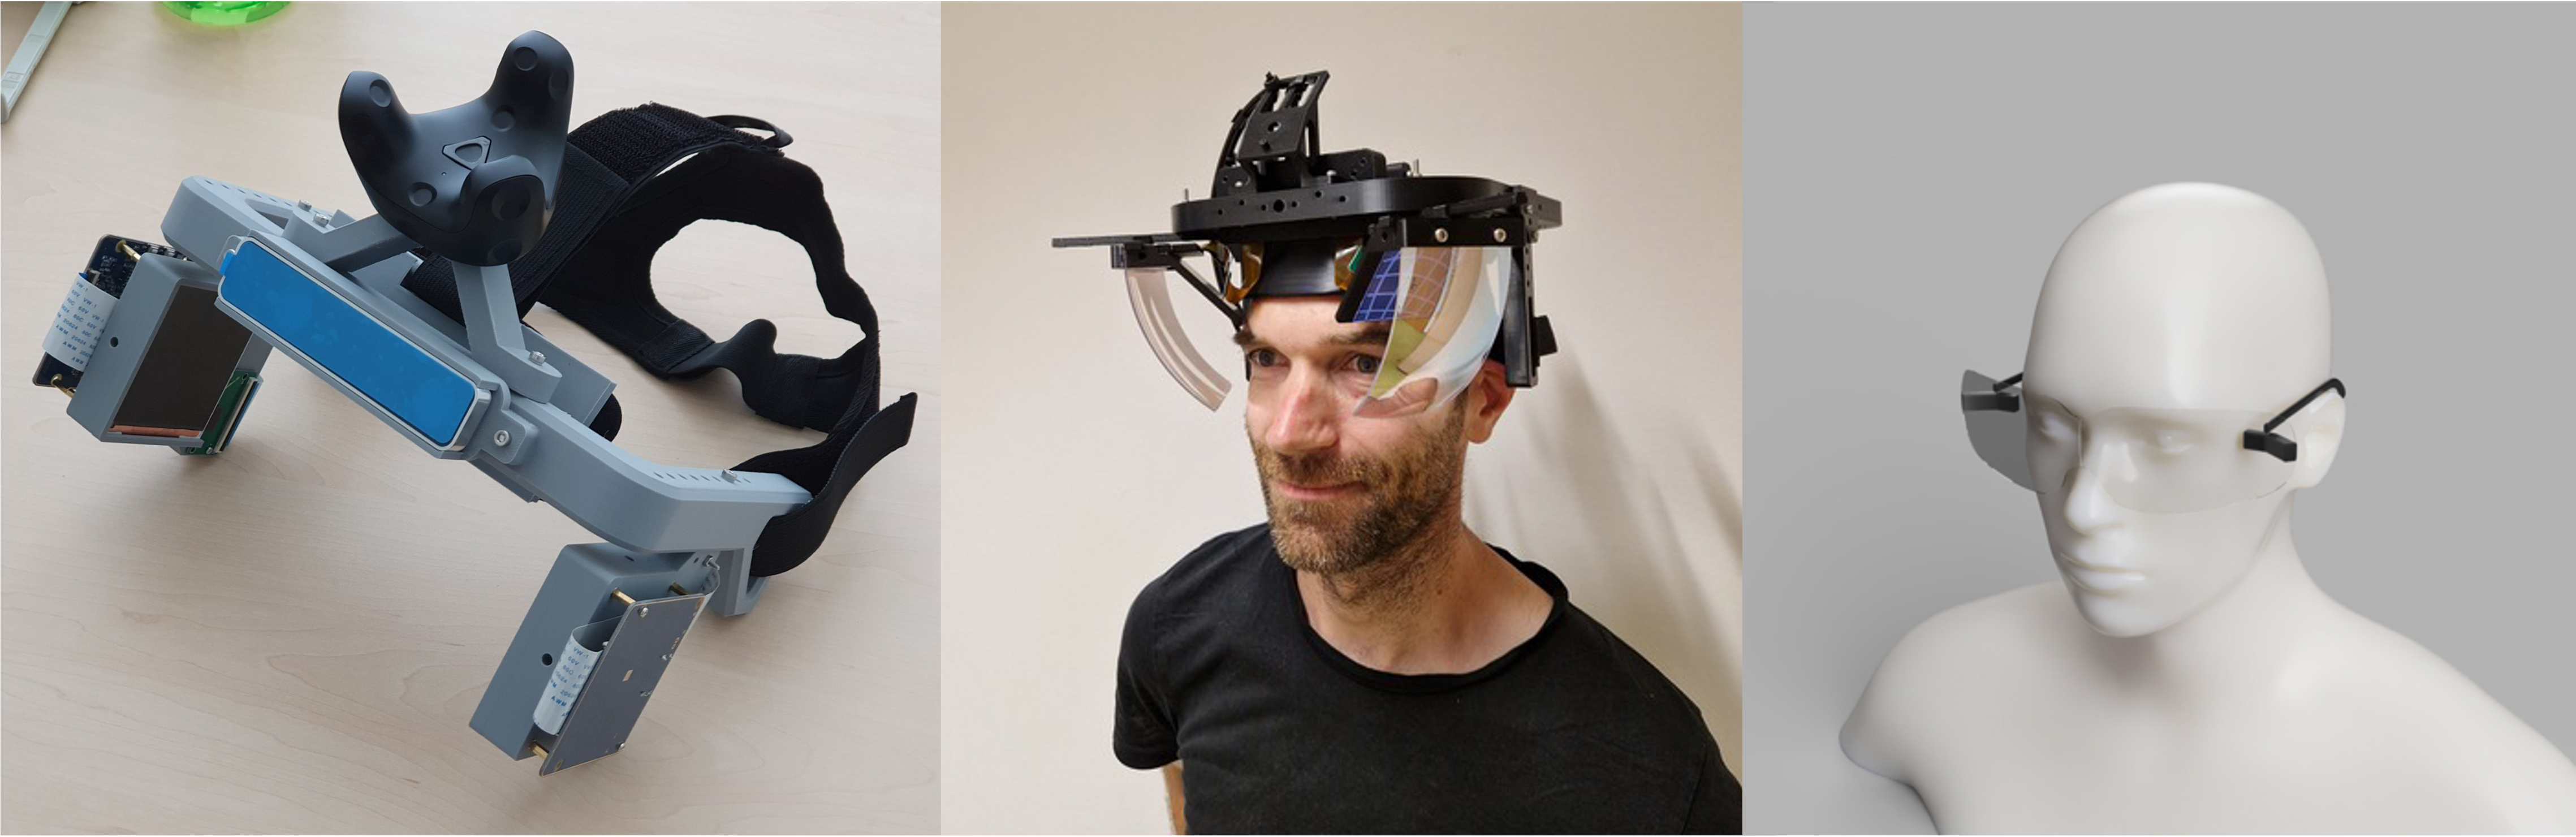 On the left, the first clunky model of AR glasses lying on a table, in the middle a man in a black T-shirt with a model of AR glasses on his head and on the right the minimalist future model of AR glasses on the head of a mannequin.